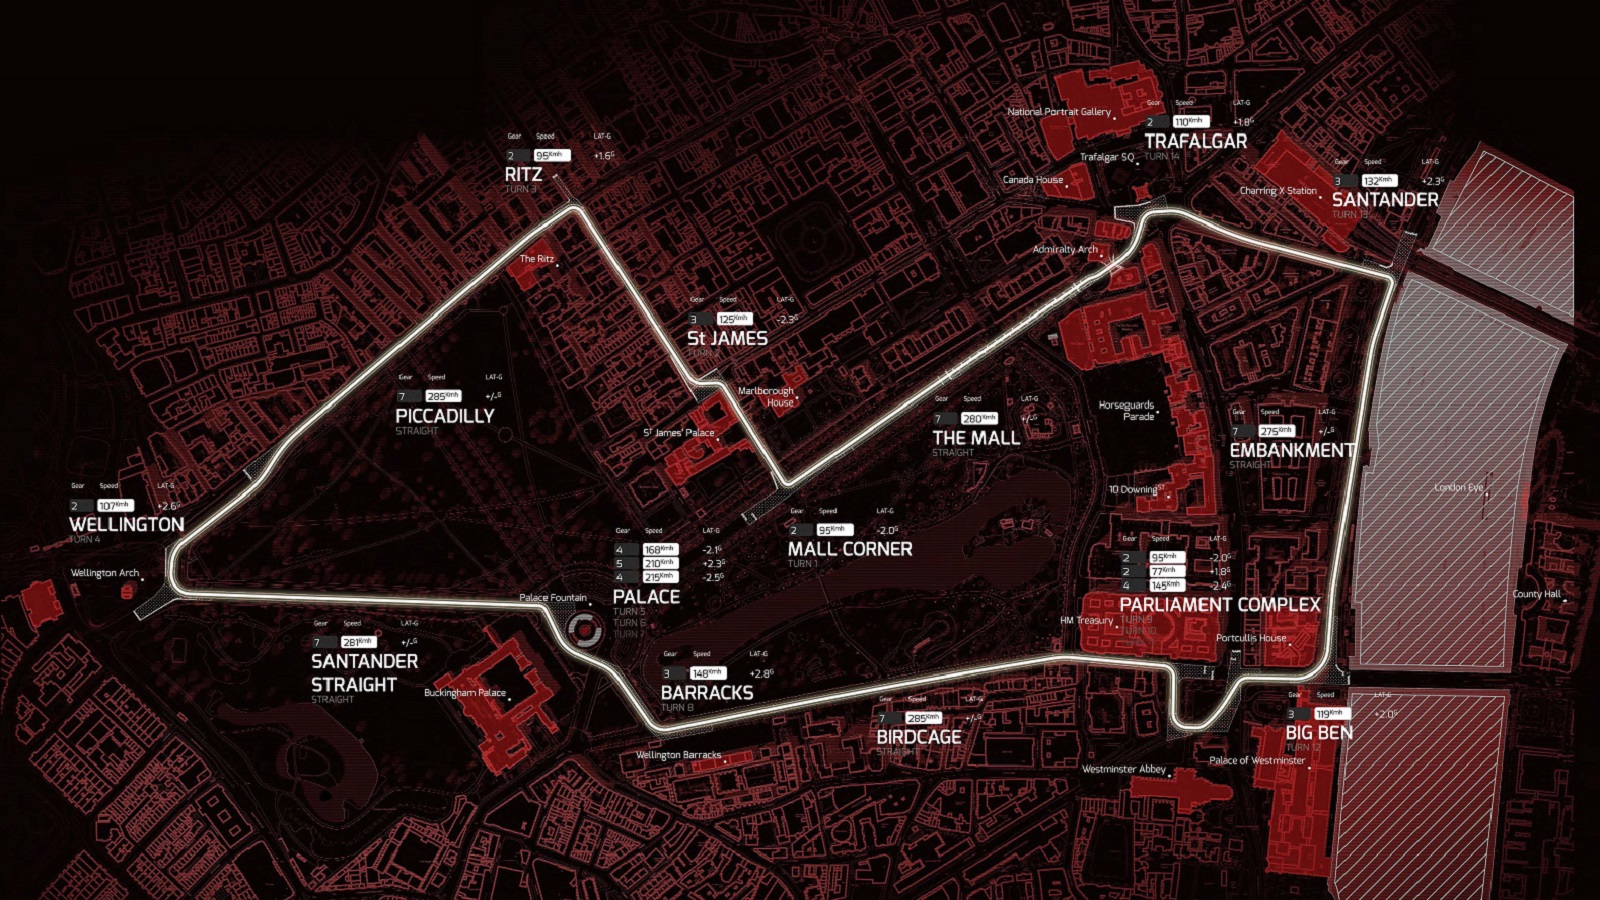 F1 talks on London Grand Prix reported as new street circuit plans